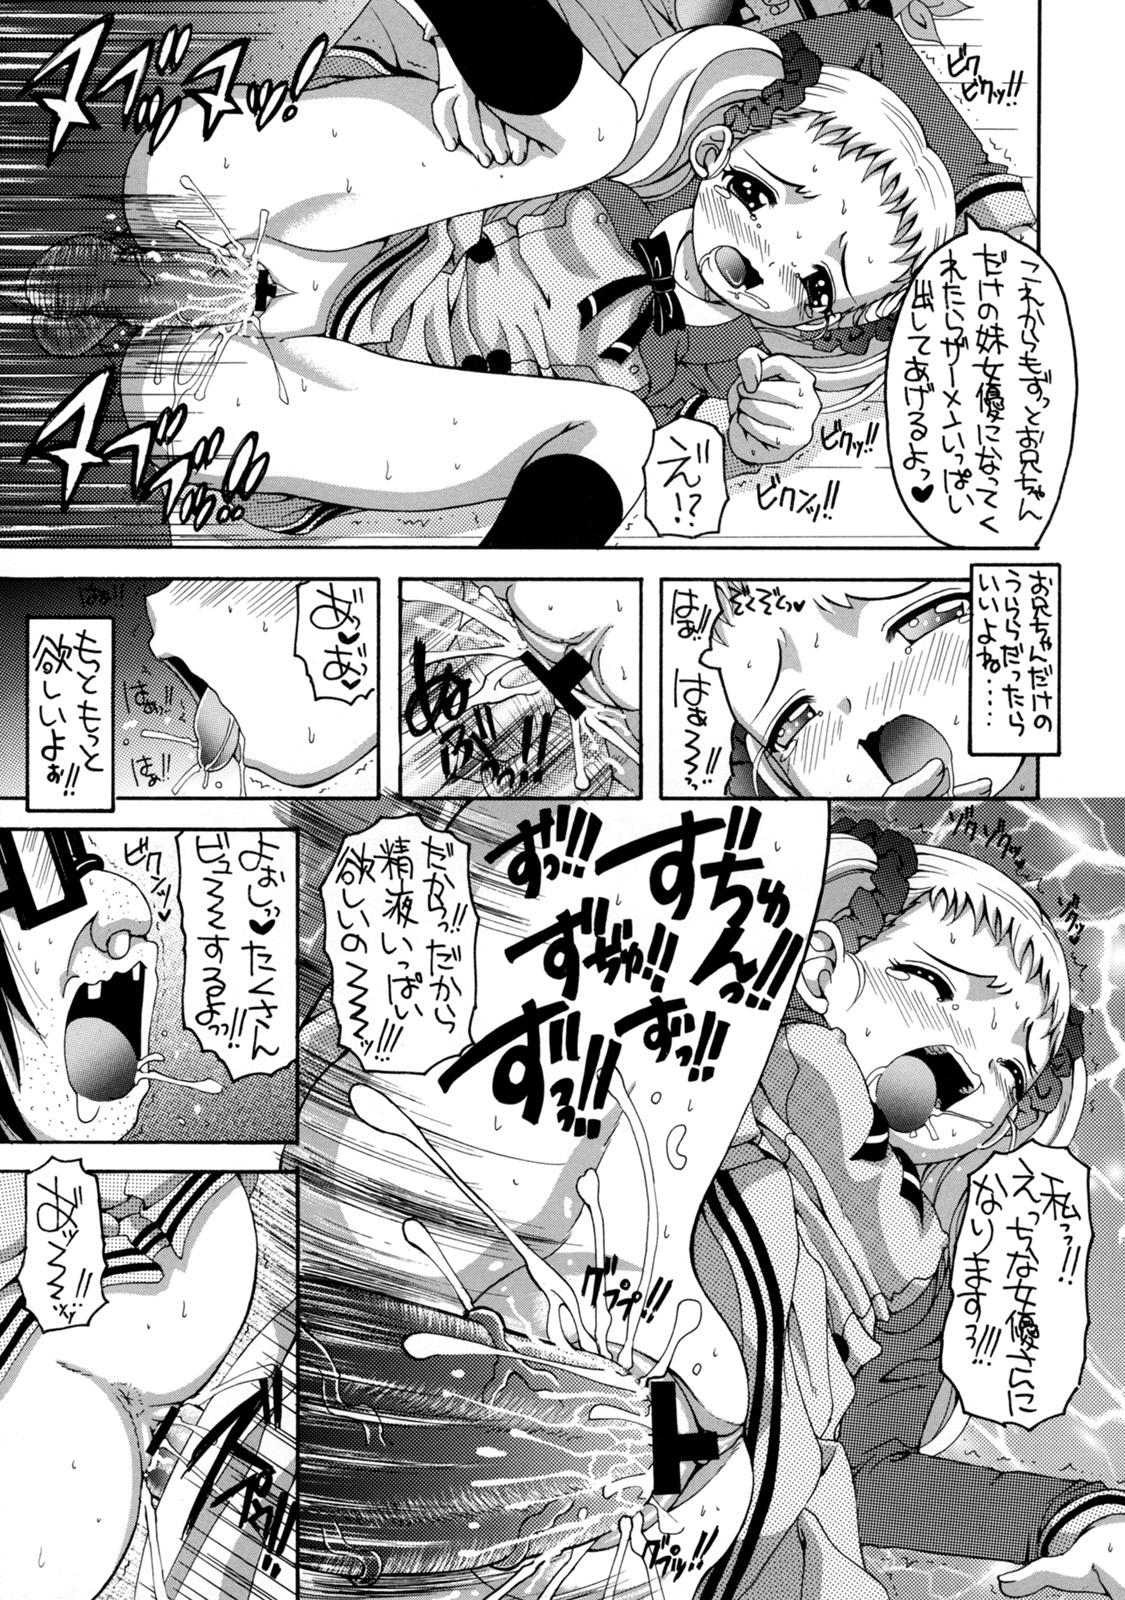 Anime Yes! Five 3 - Pretty cure Yes precure 5 Coroa - Page 12